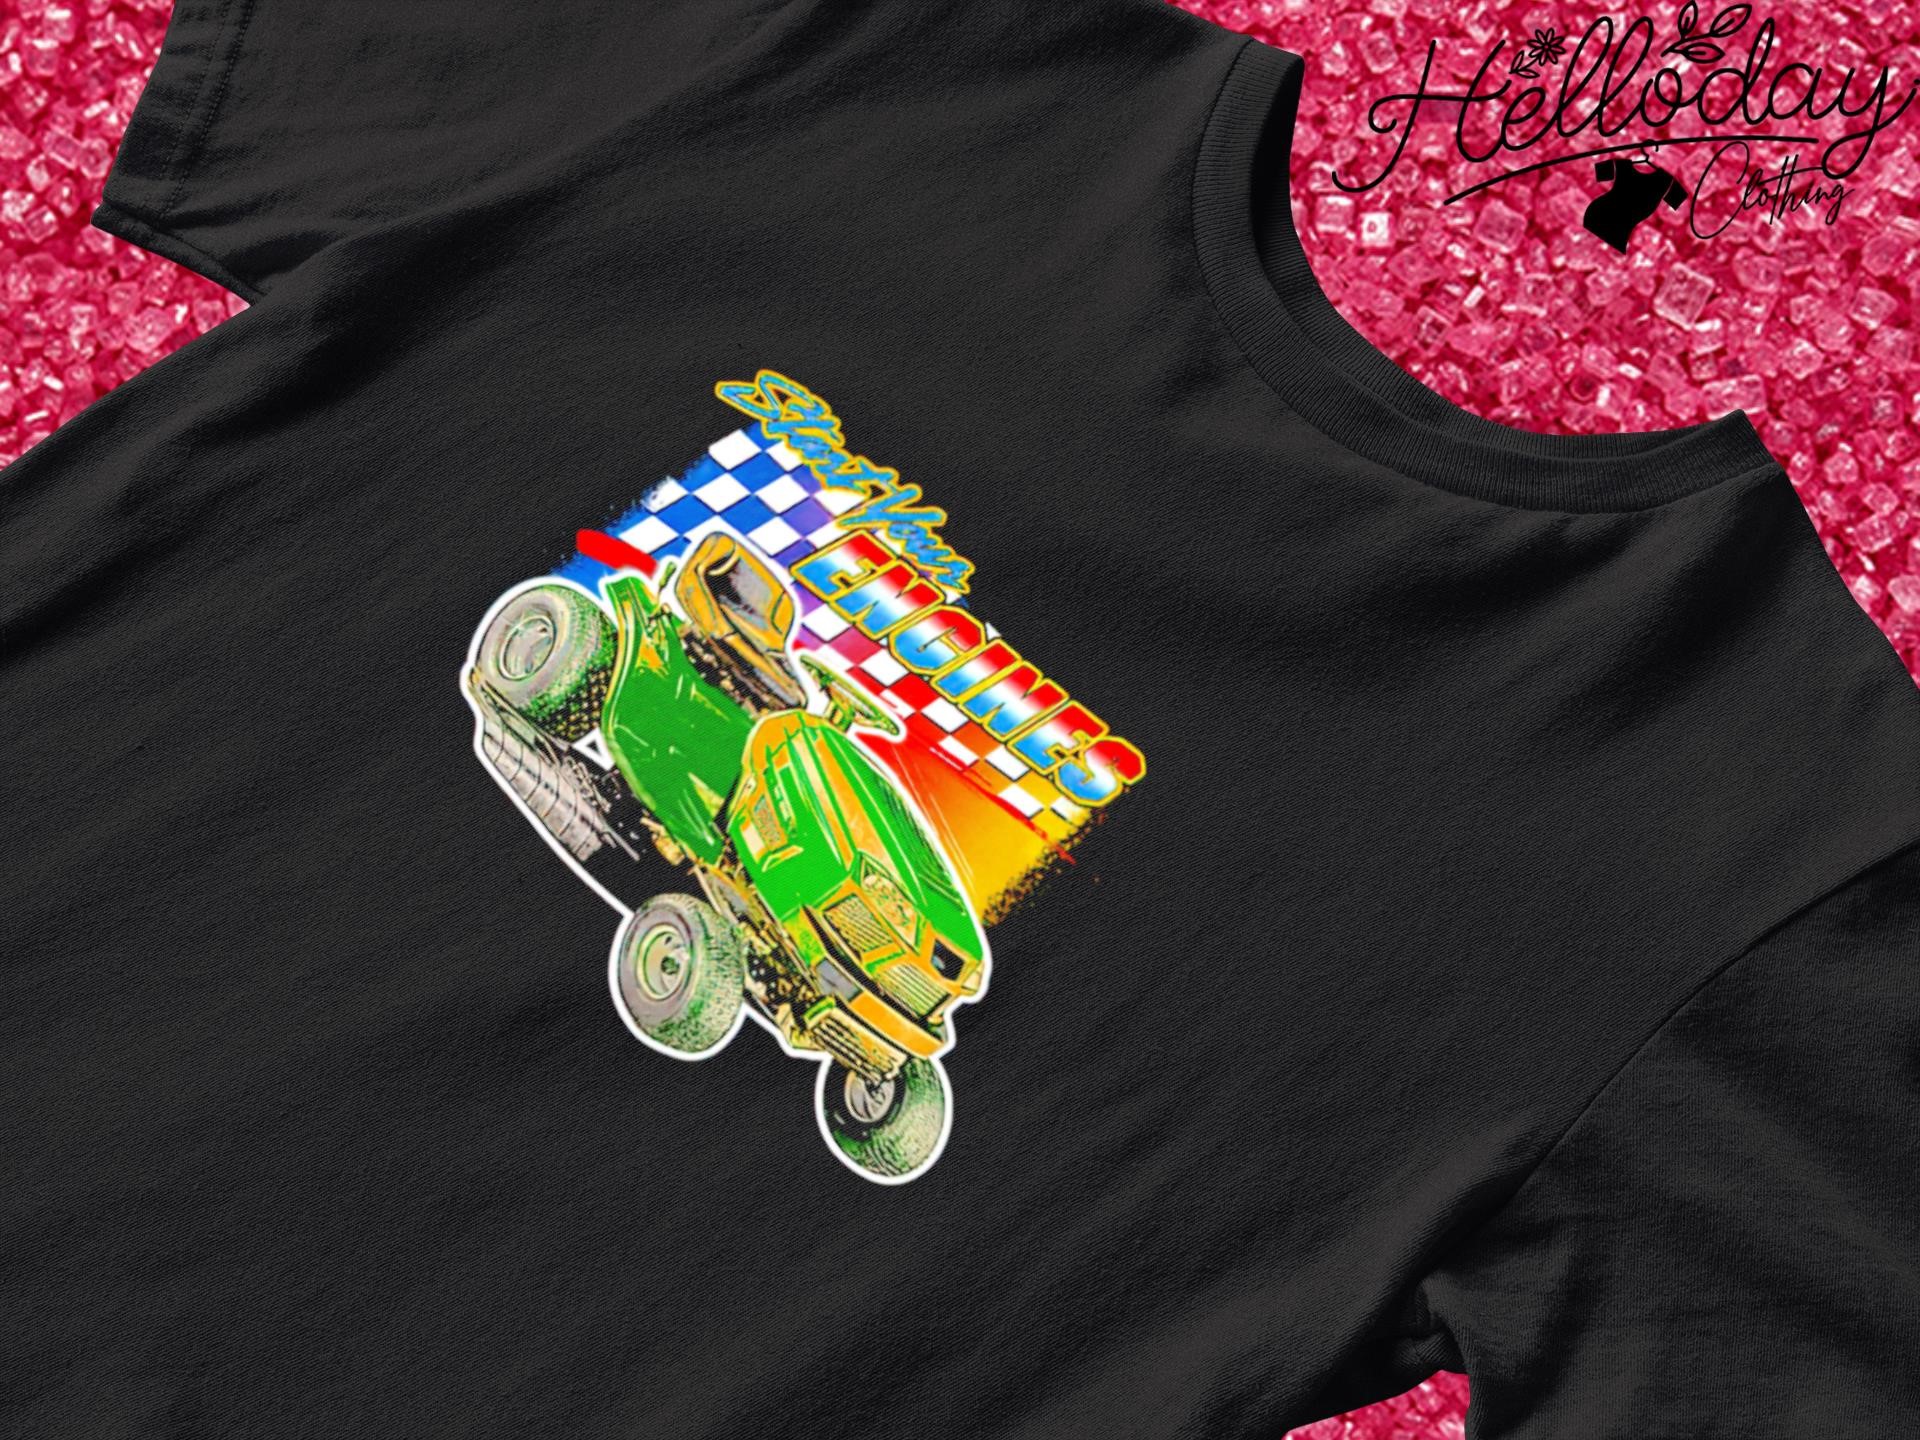 Start Your Engines shirt